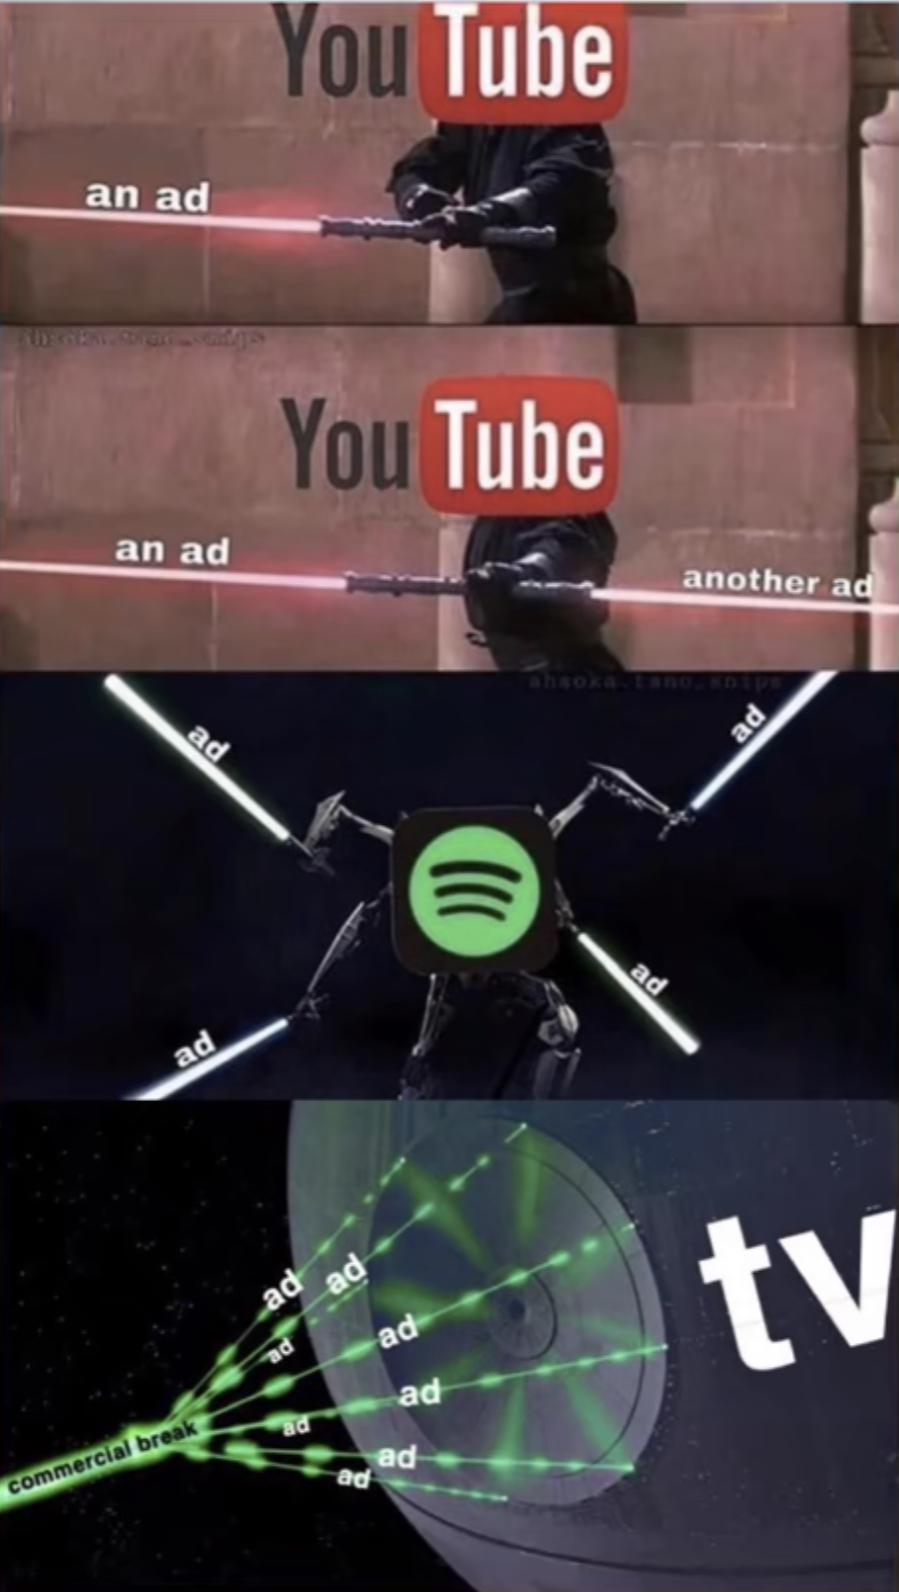 funny memes - original trilogy memes - an ad an ad ad ad commercial break You Tube You Tube ad ad ad ad ad ad ad ad ad another ad ad tv